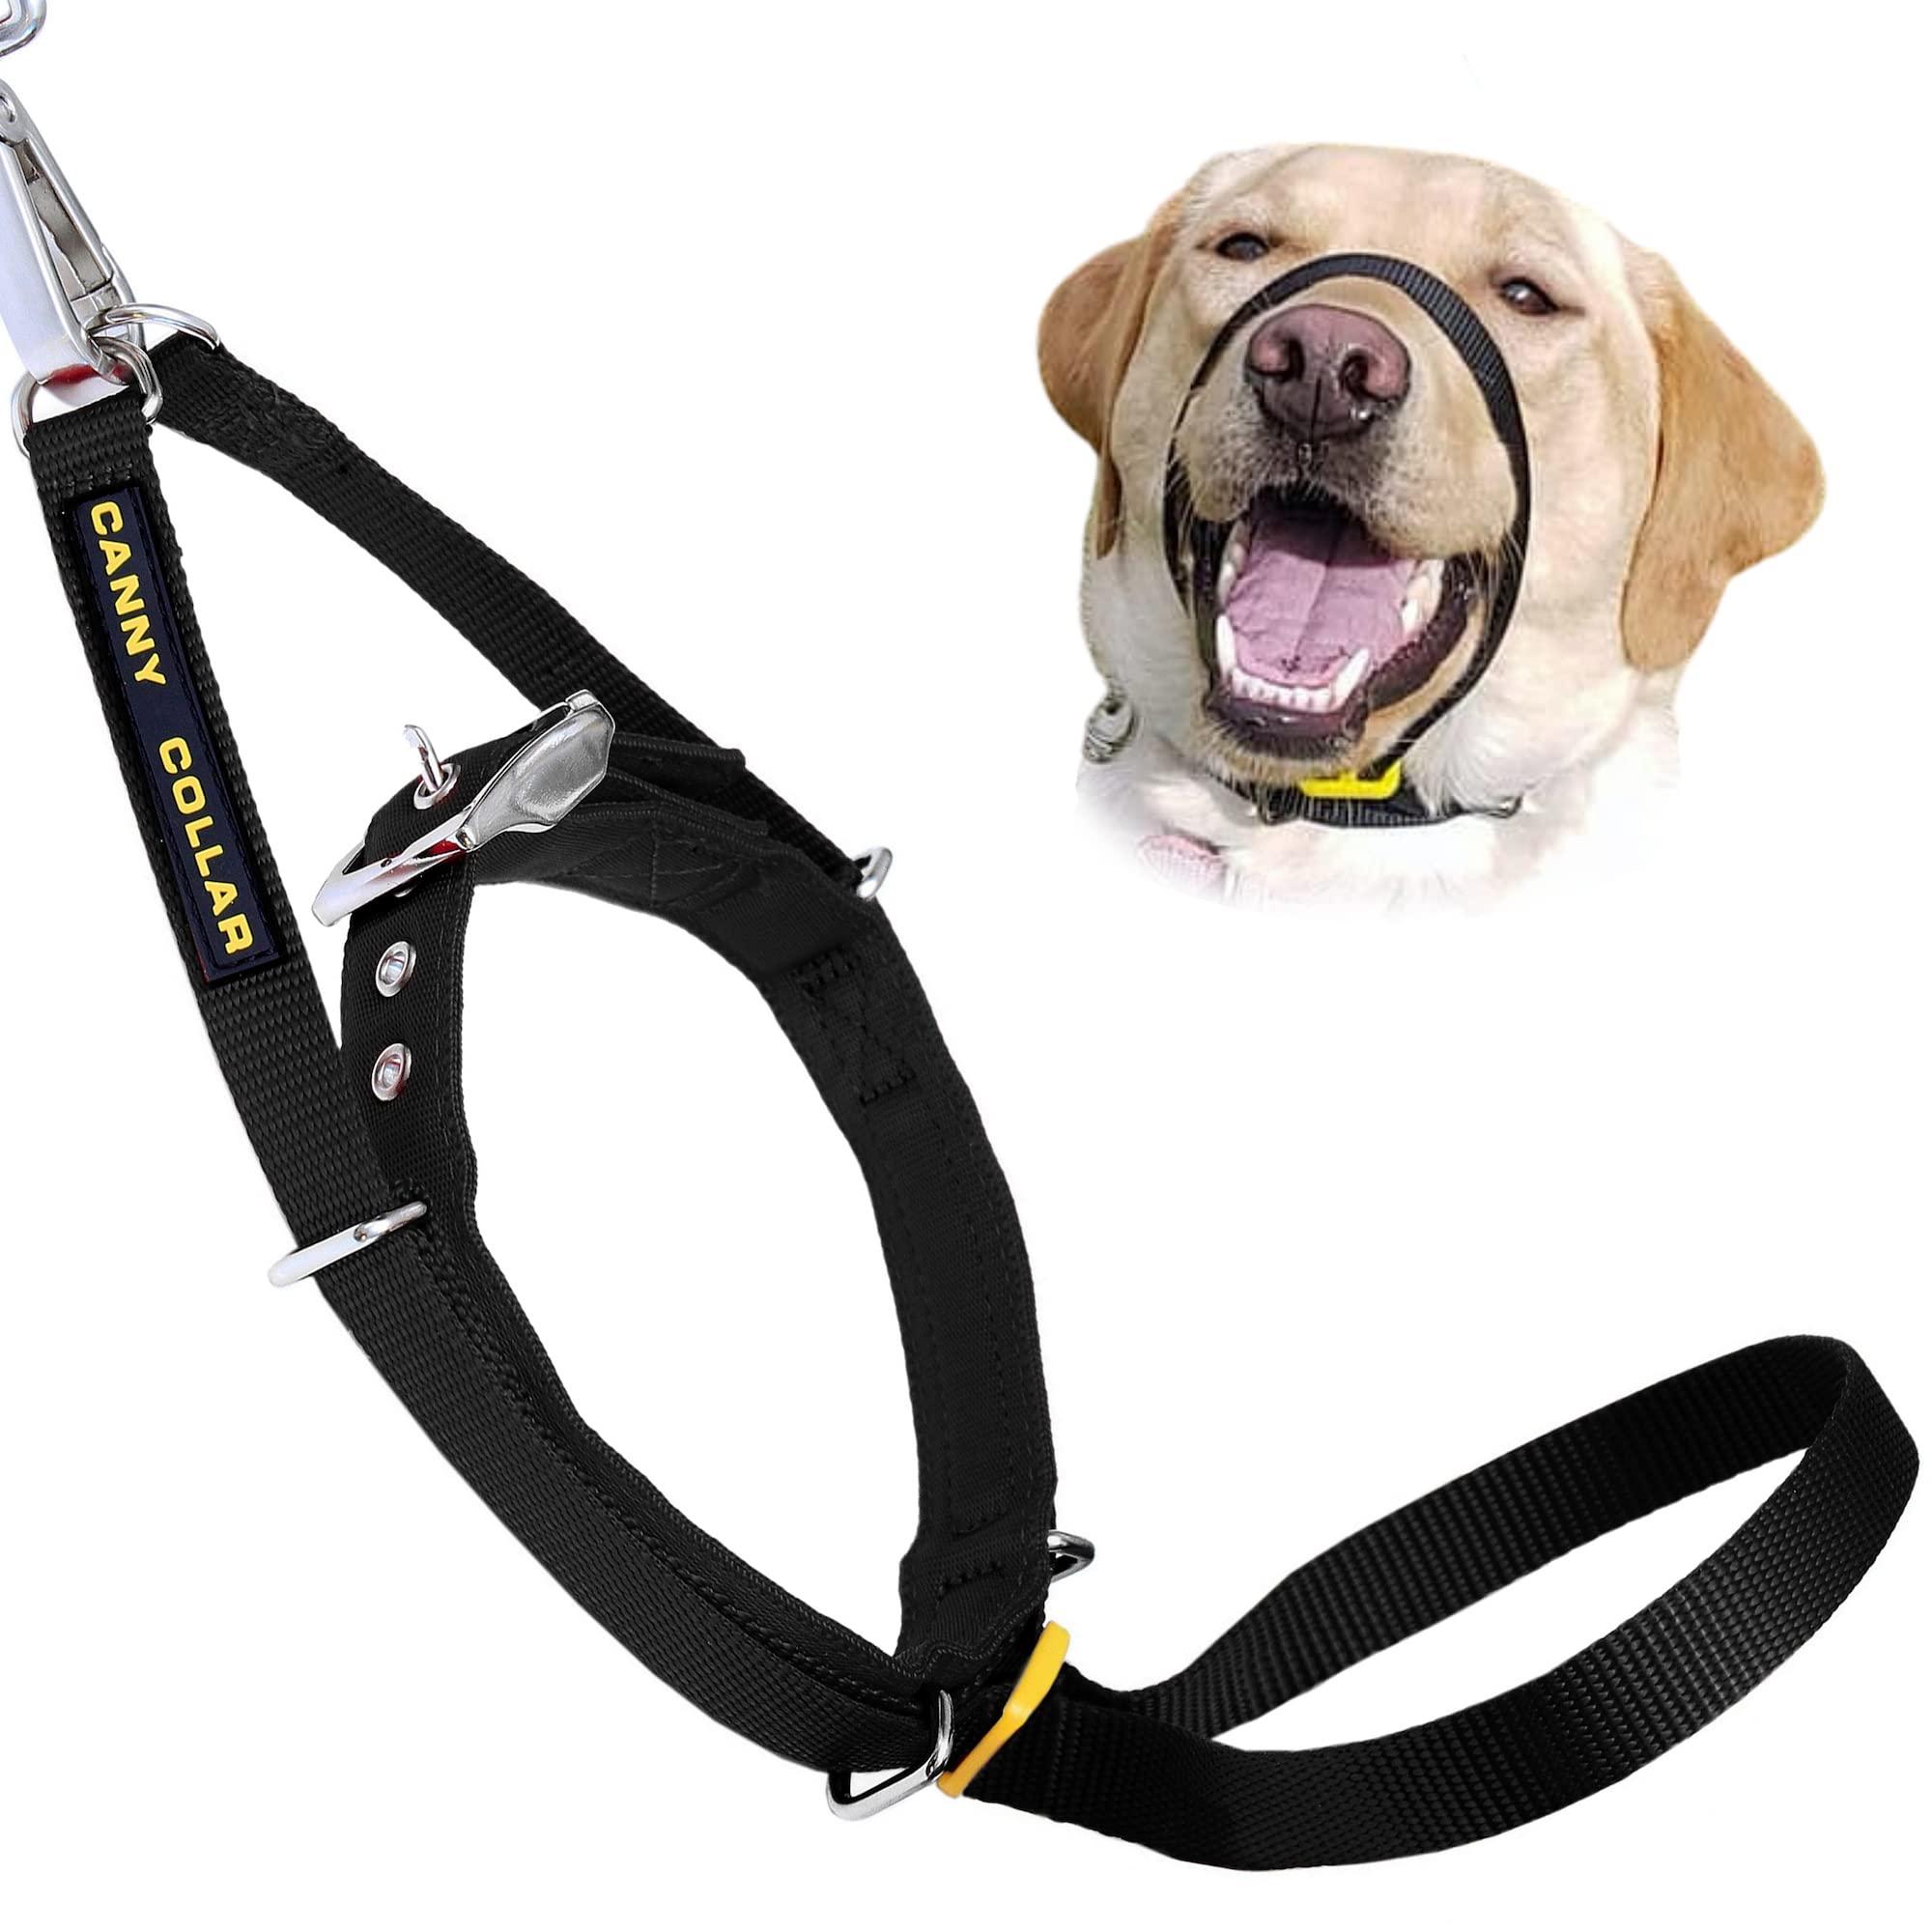 canny collar Dog Head collar, No Pull Leash Training Head Harness, Easy to Fit Halter that Stops Pulling, comfortable calm control with Padded collar, Kind To Your Dog, Enjoy gentle Walks with Small, Medium or Large Dogs, Black, Blue, Purple Red